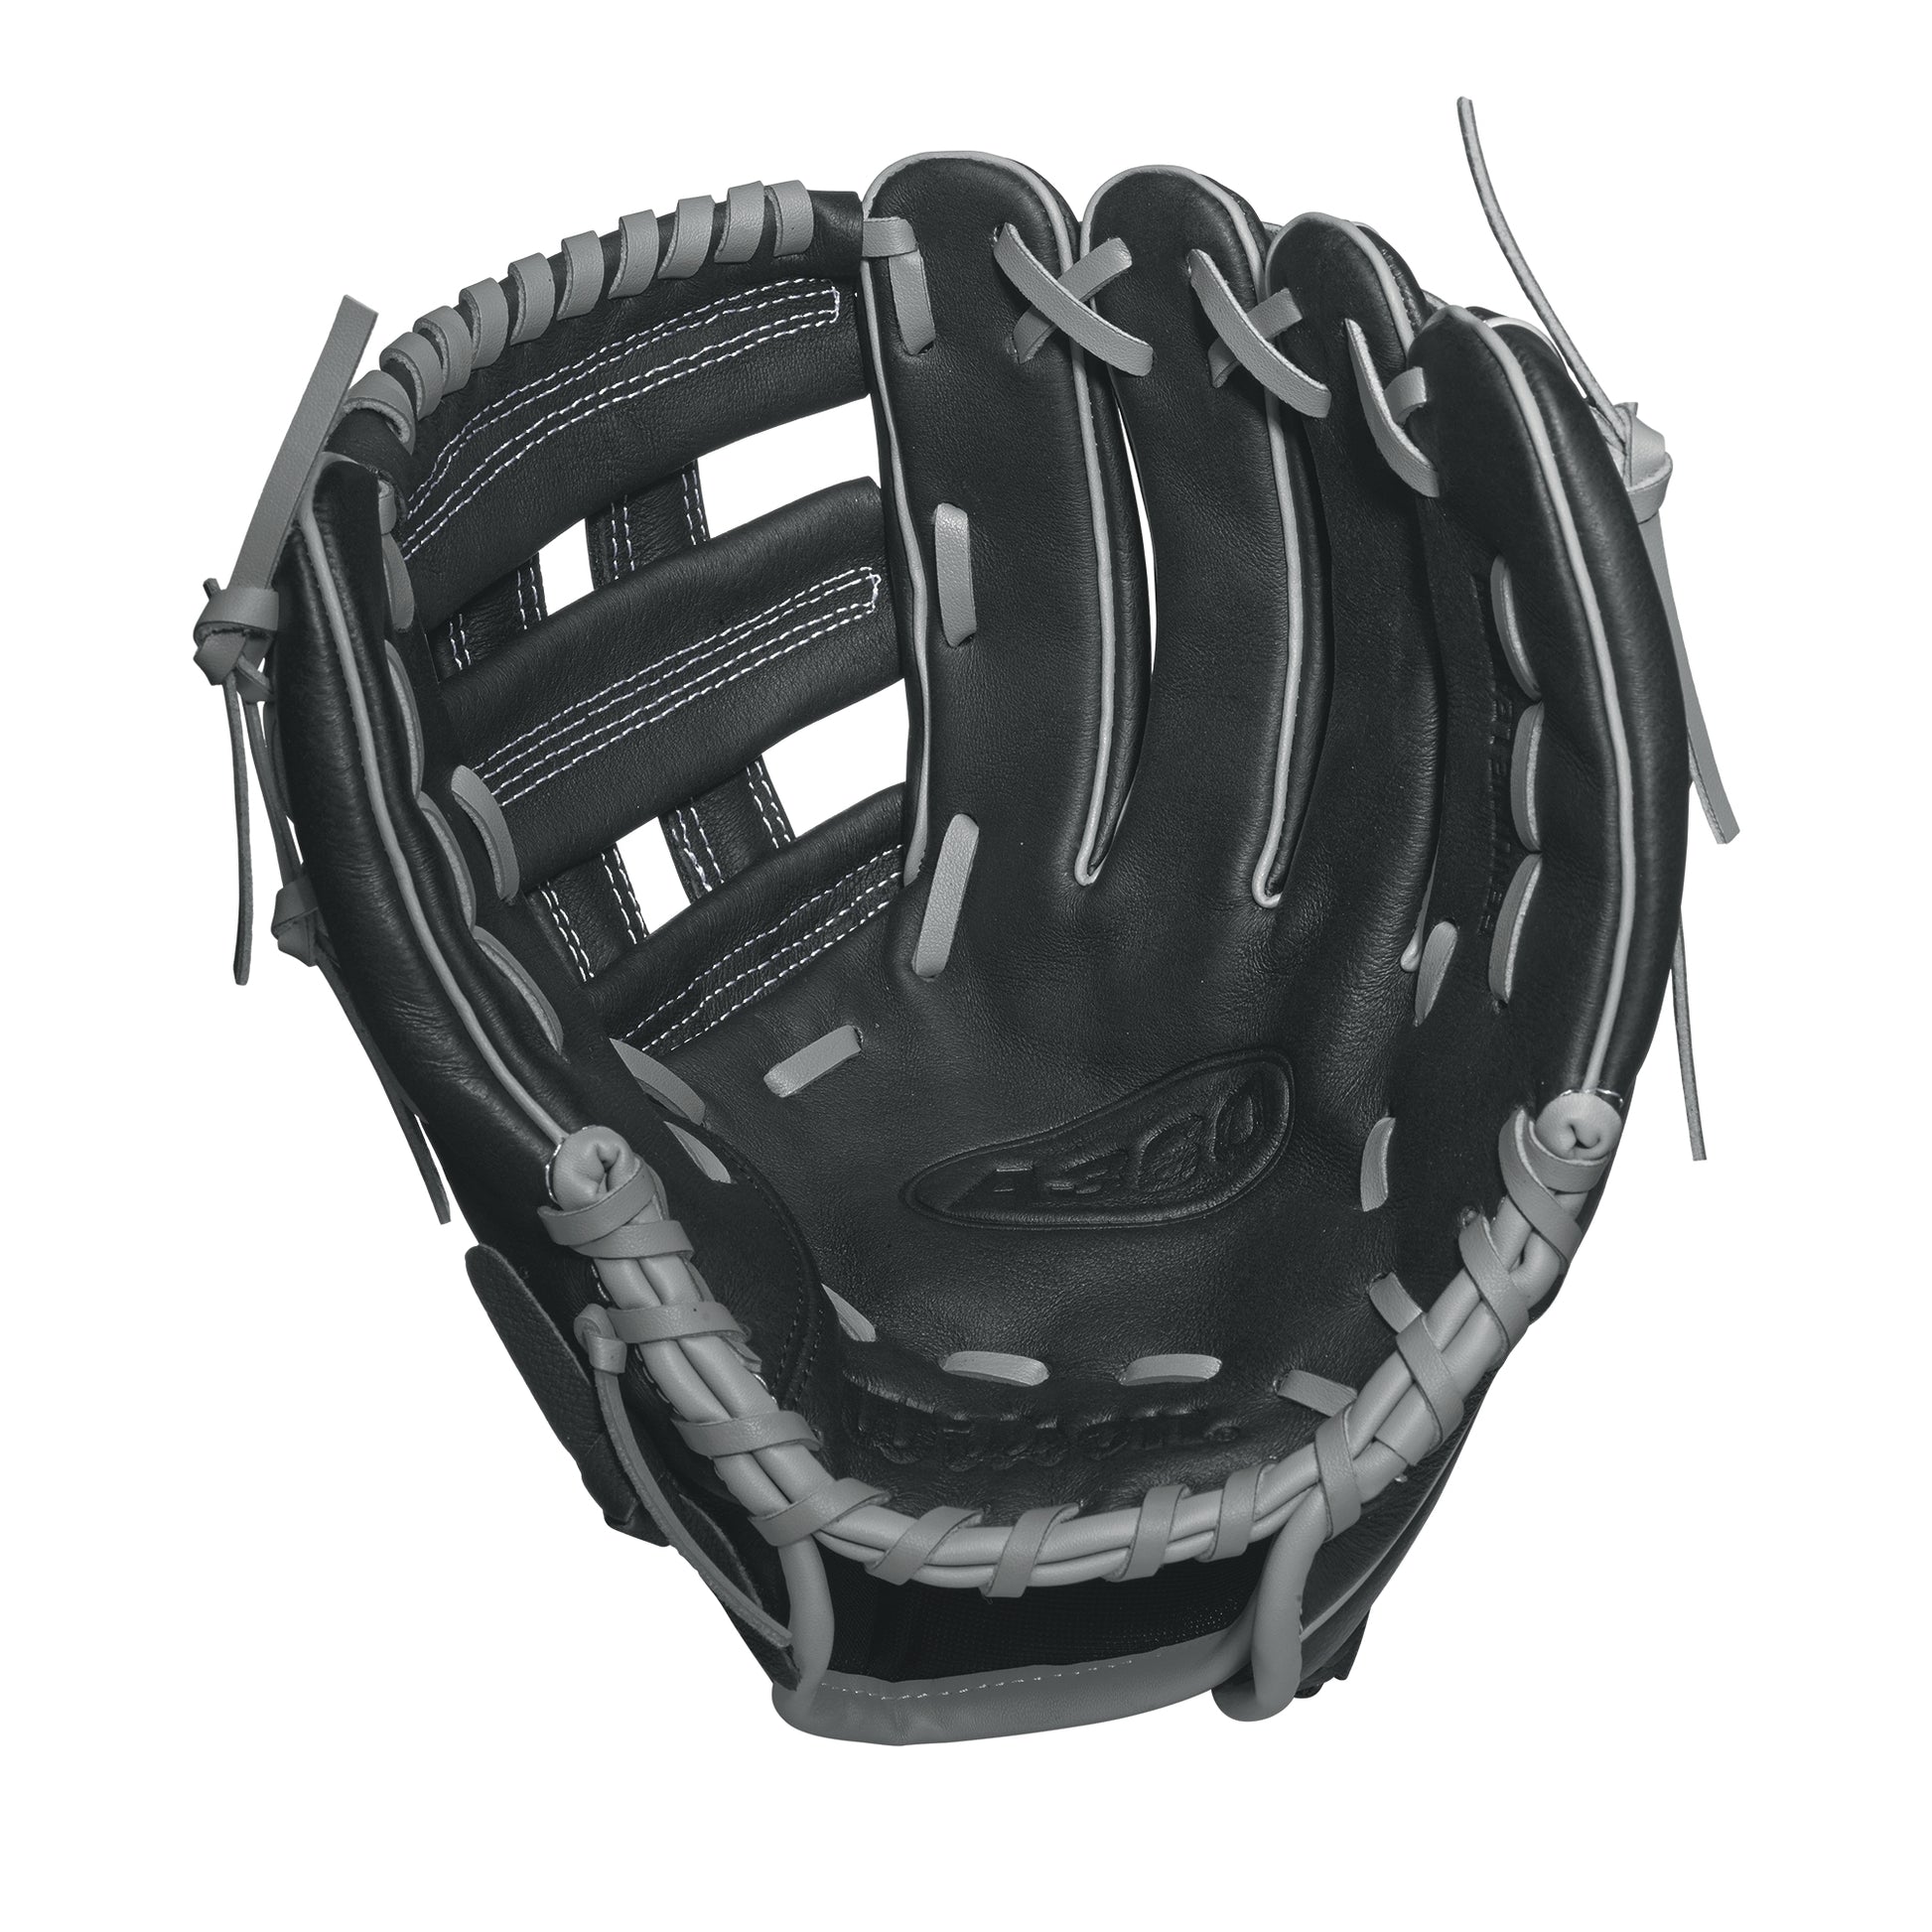 wilson-a360-youth-baseball-glove-11-5-in-a03rb17115